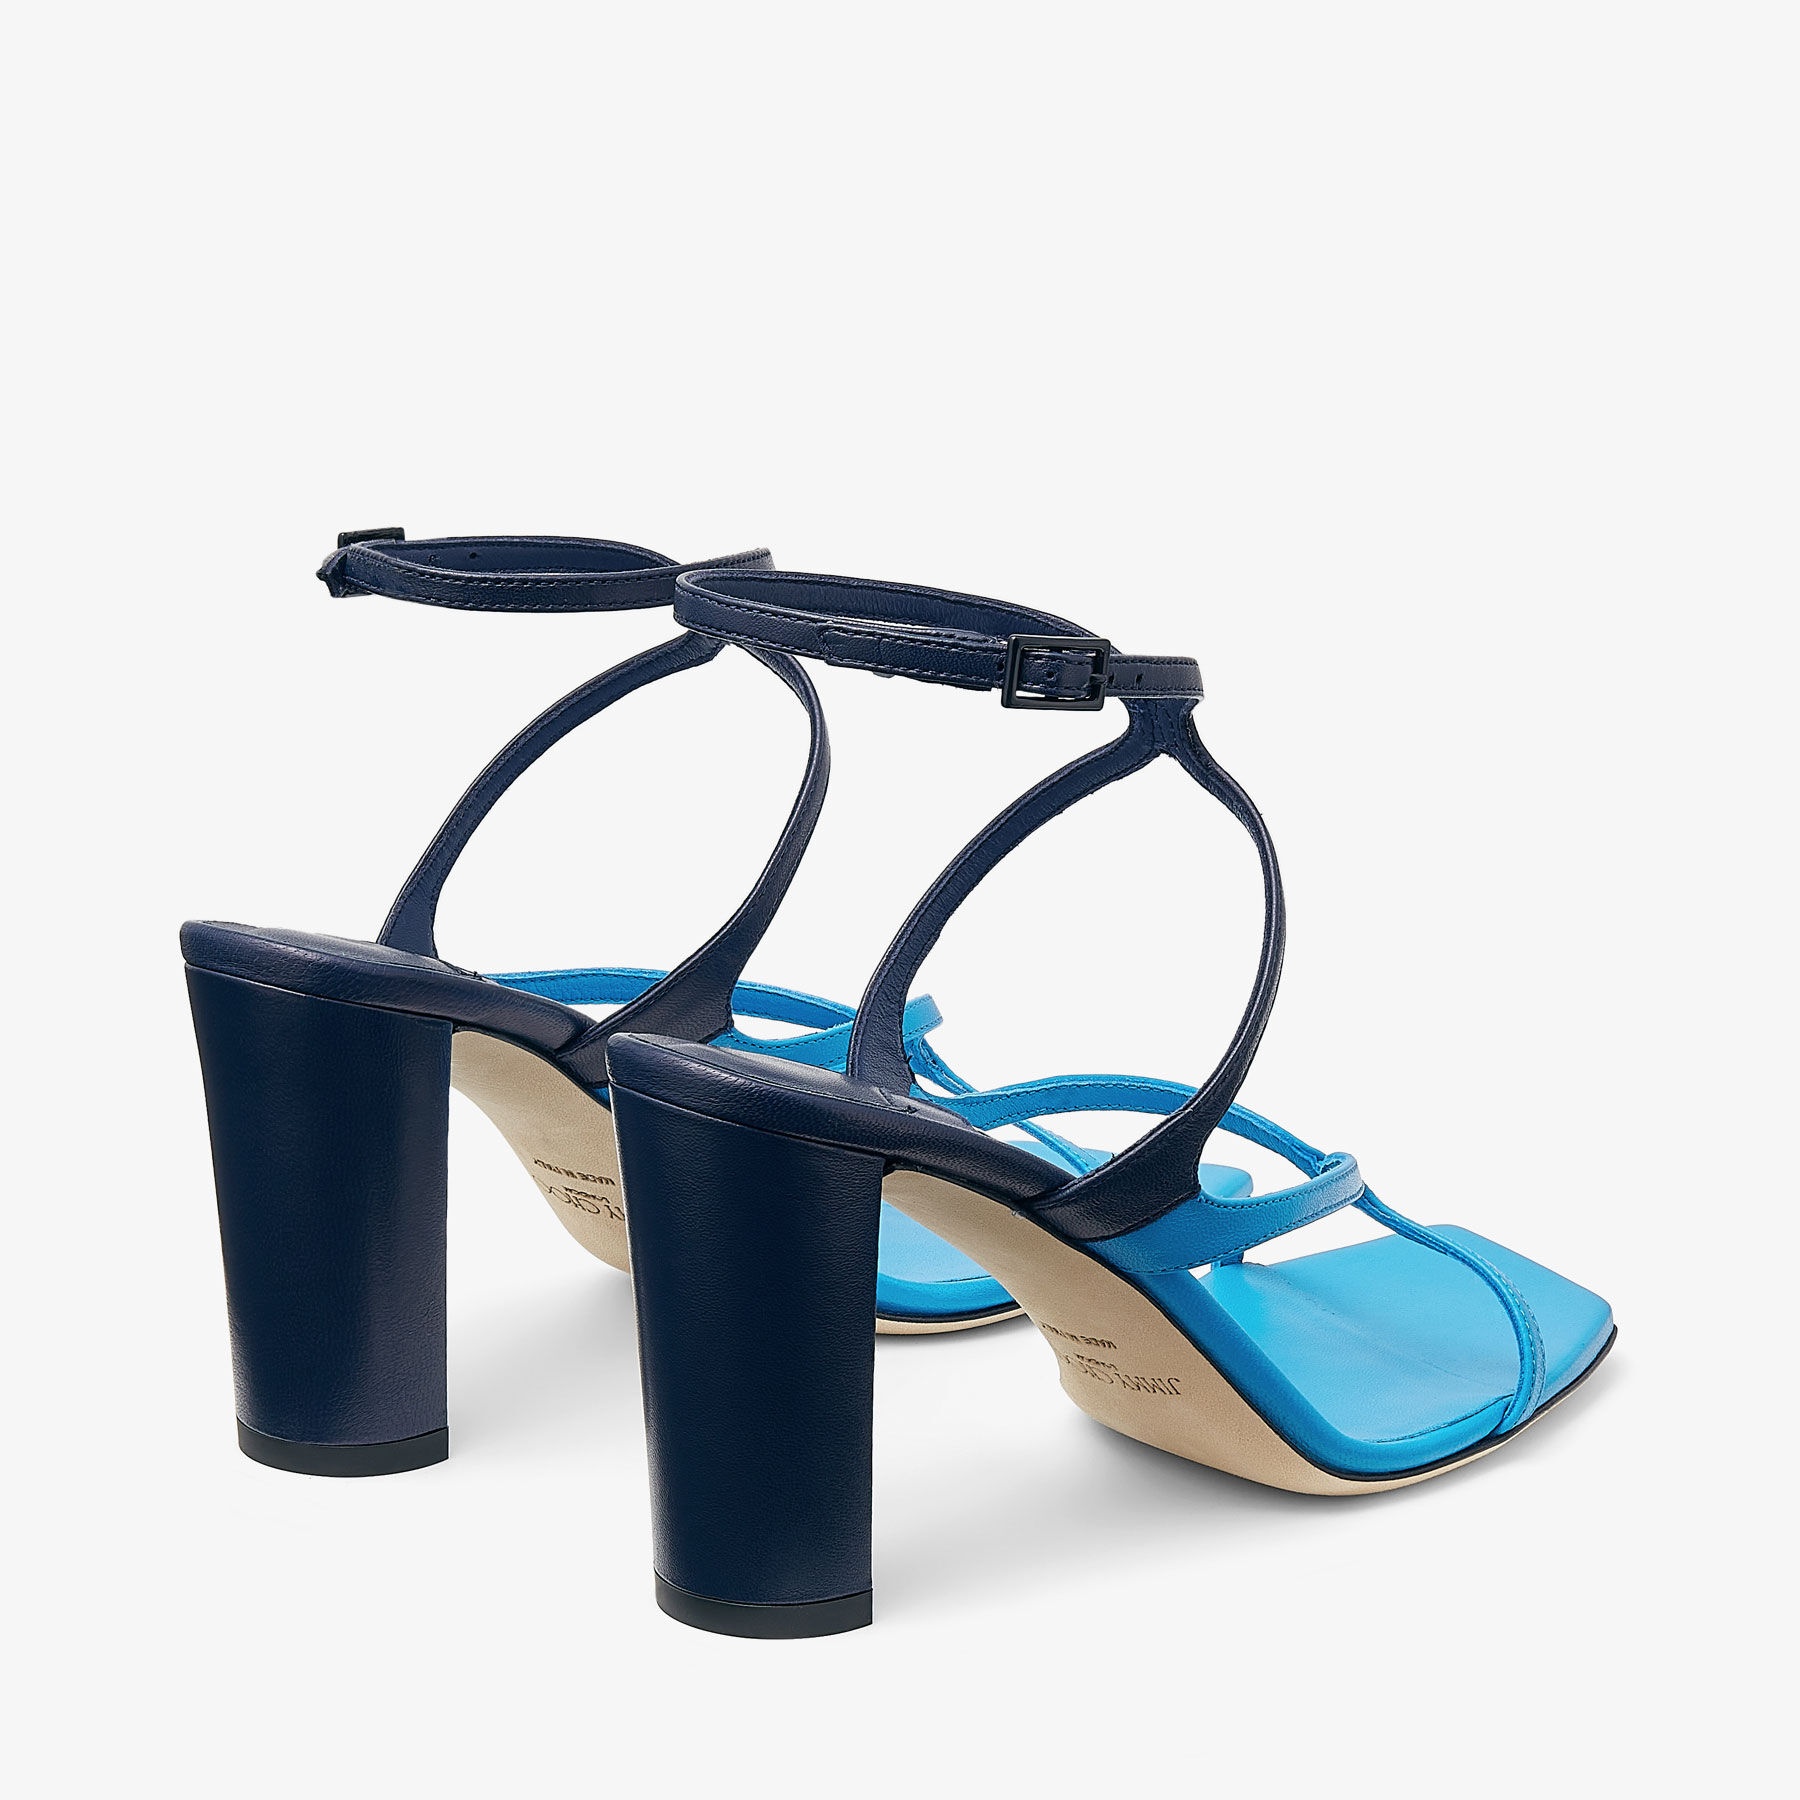 Azie 85
Sky and Navy Patchwork Nappa Leather Sandals - 5